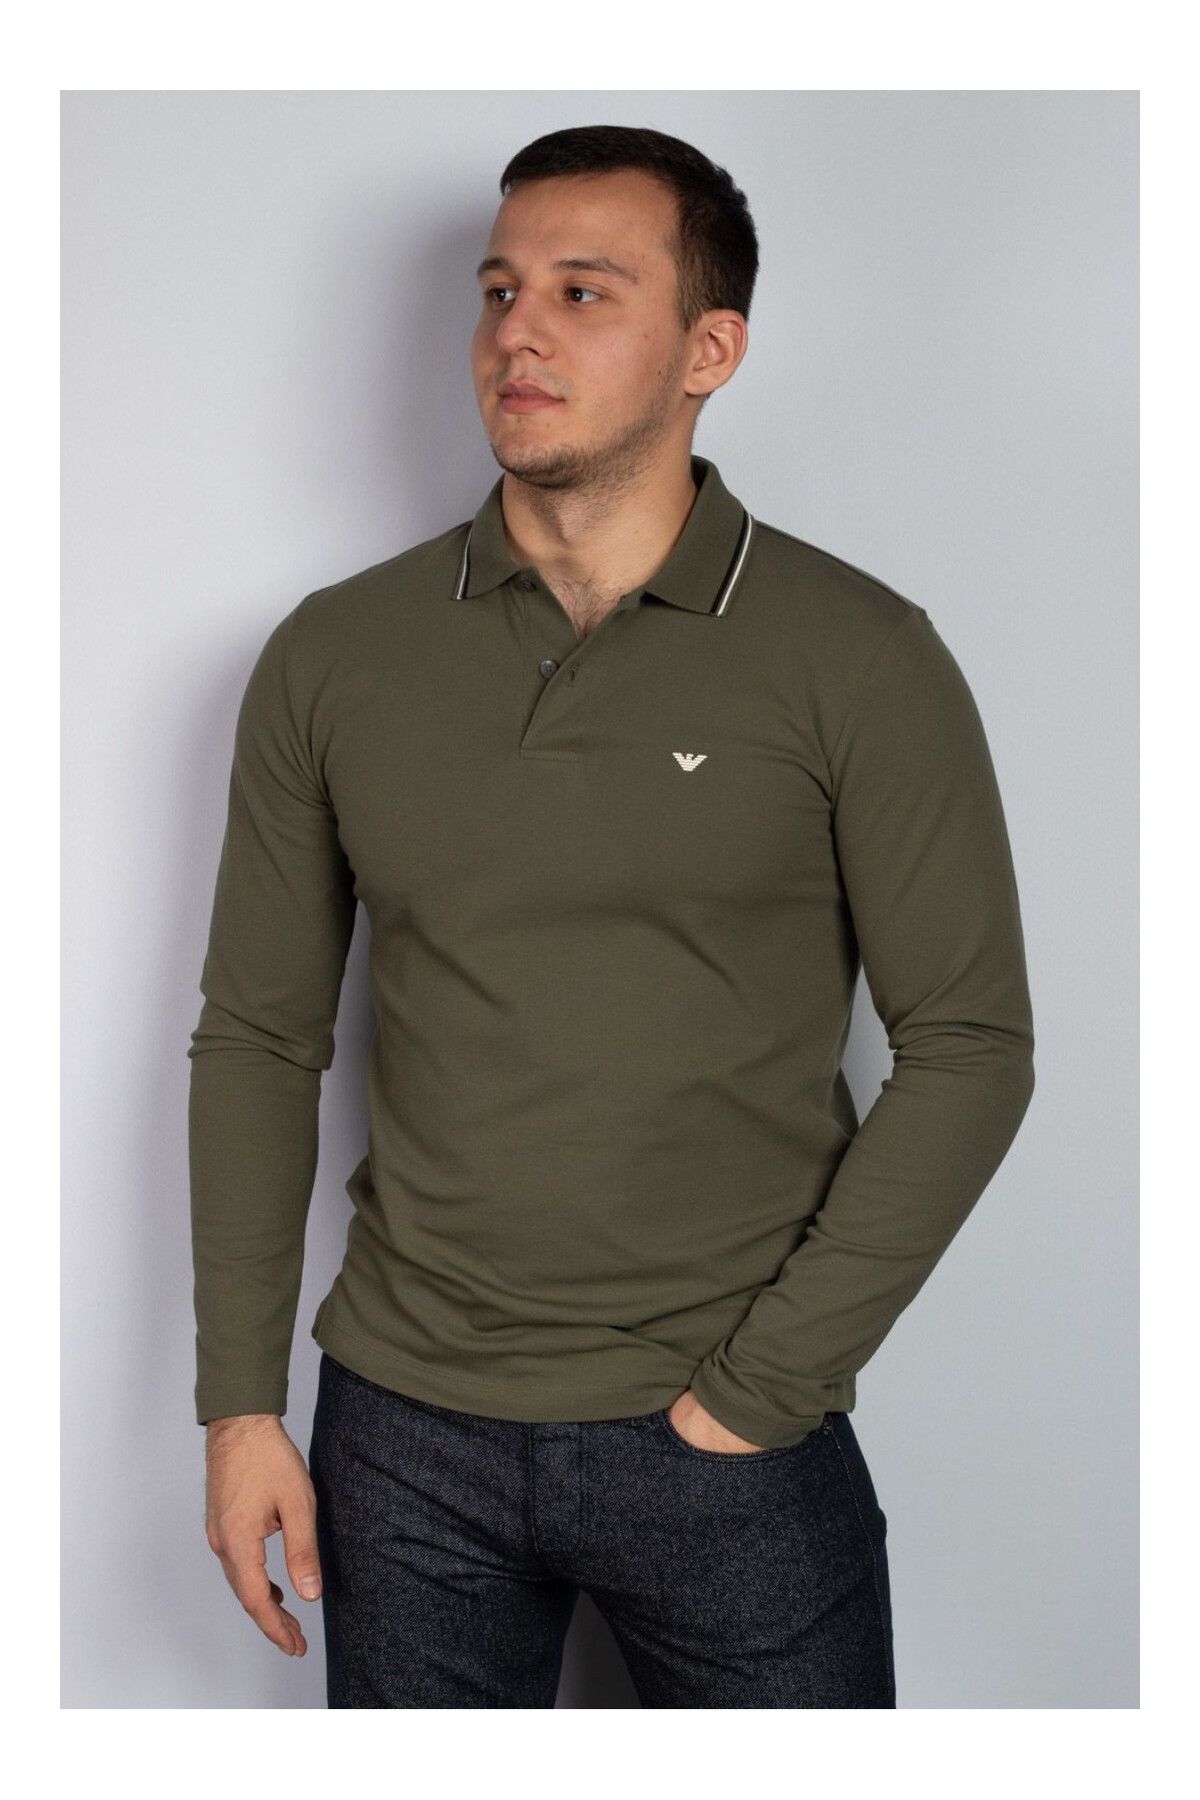 Emporio Armani Polo T-shirt - Green - Relaxed fit - Trendyol